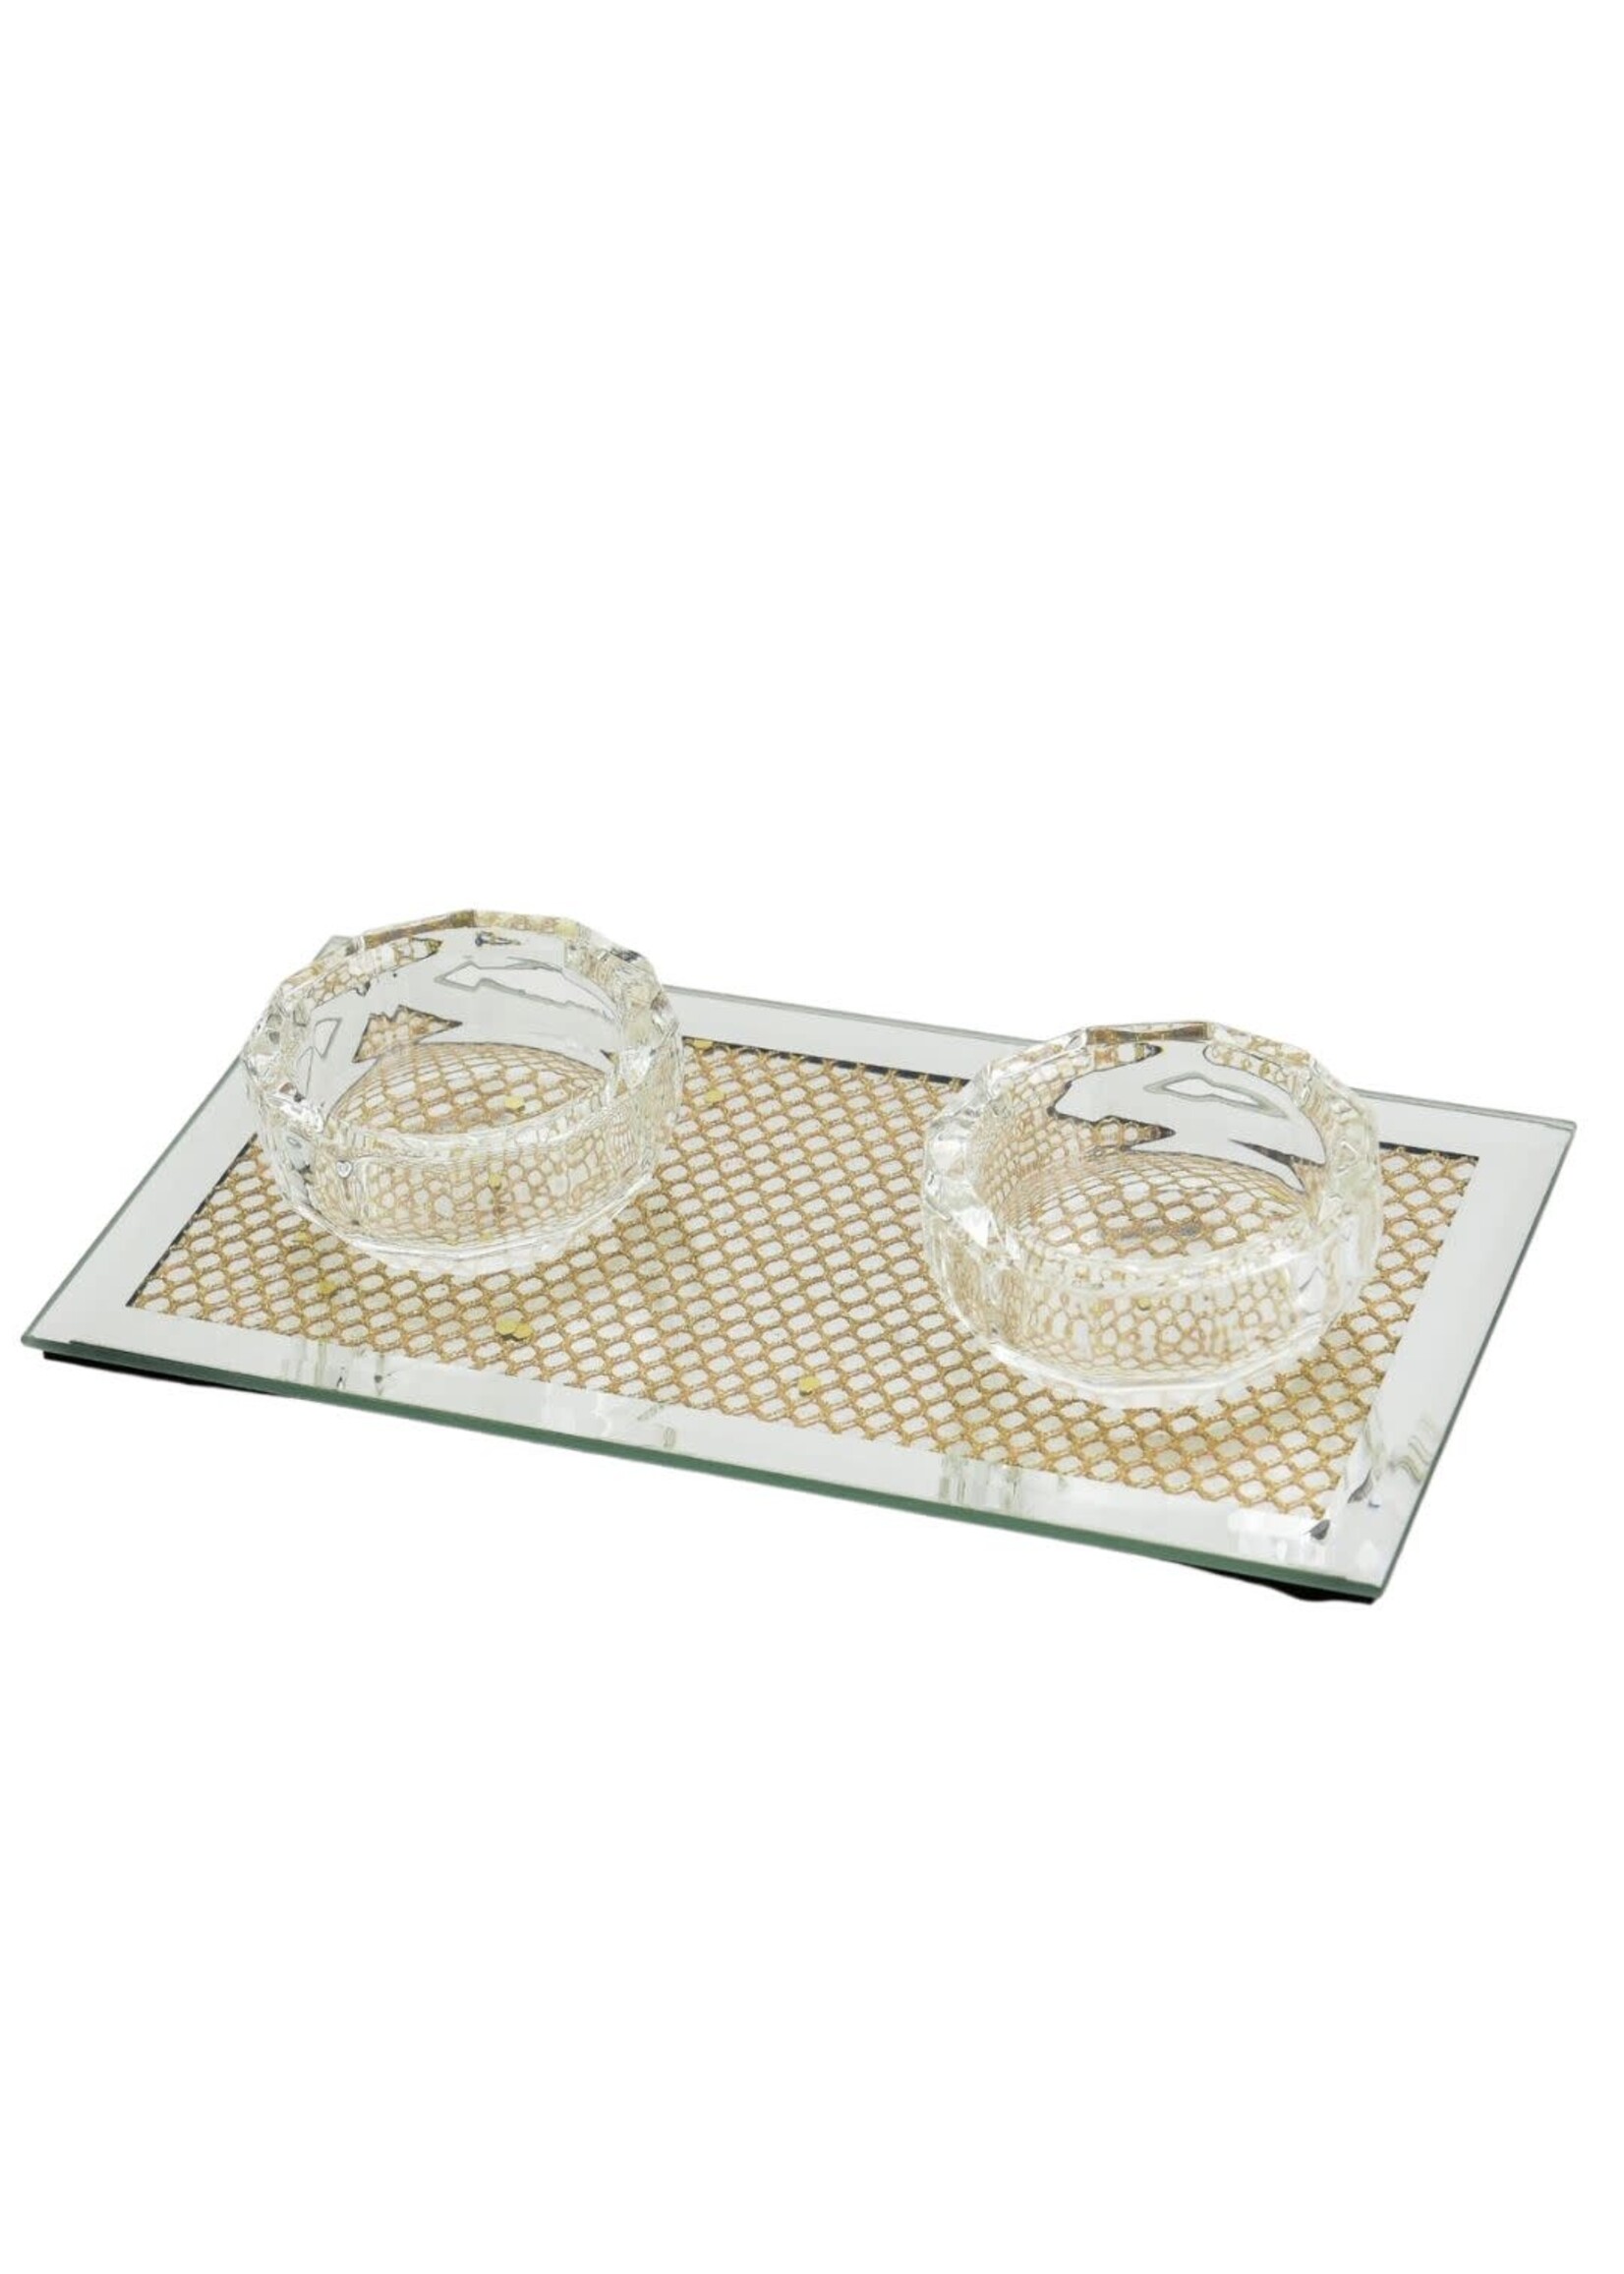 CRYSTAL CANDLE HOLDER-GOLD MESH 3.5"X6.75"